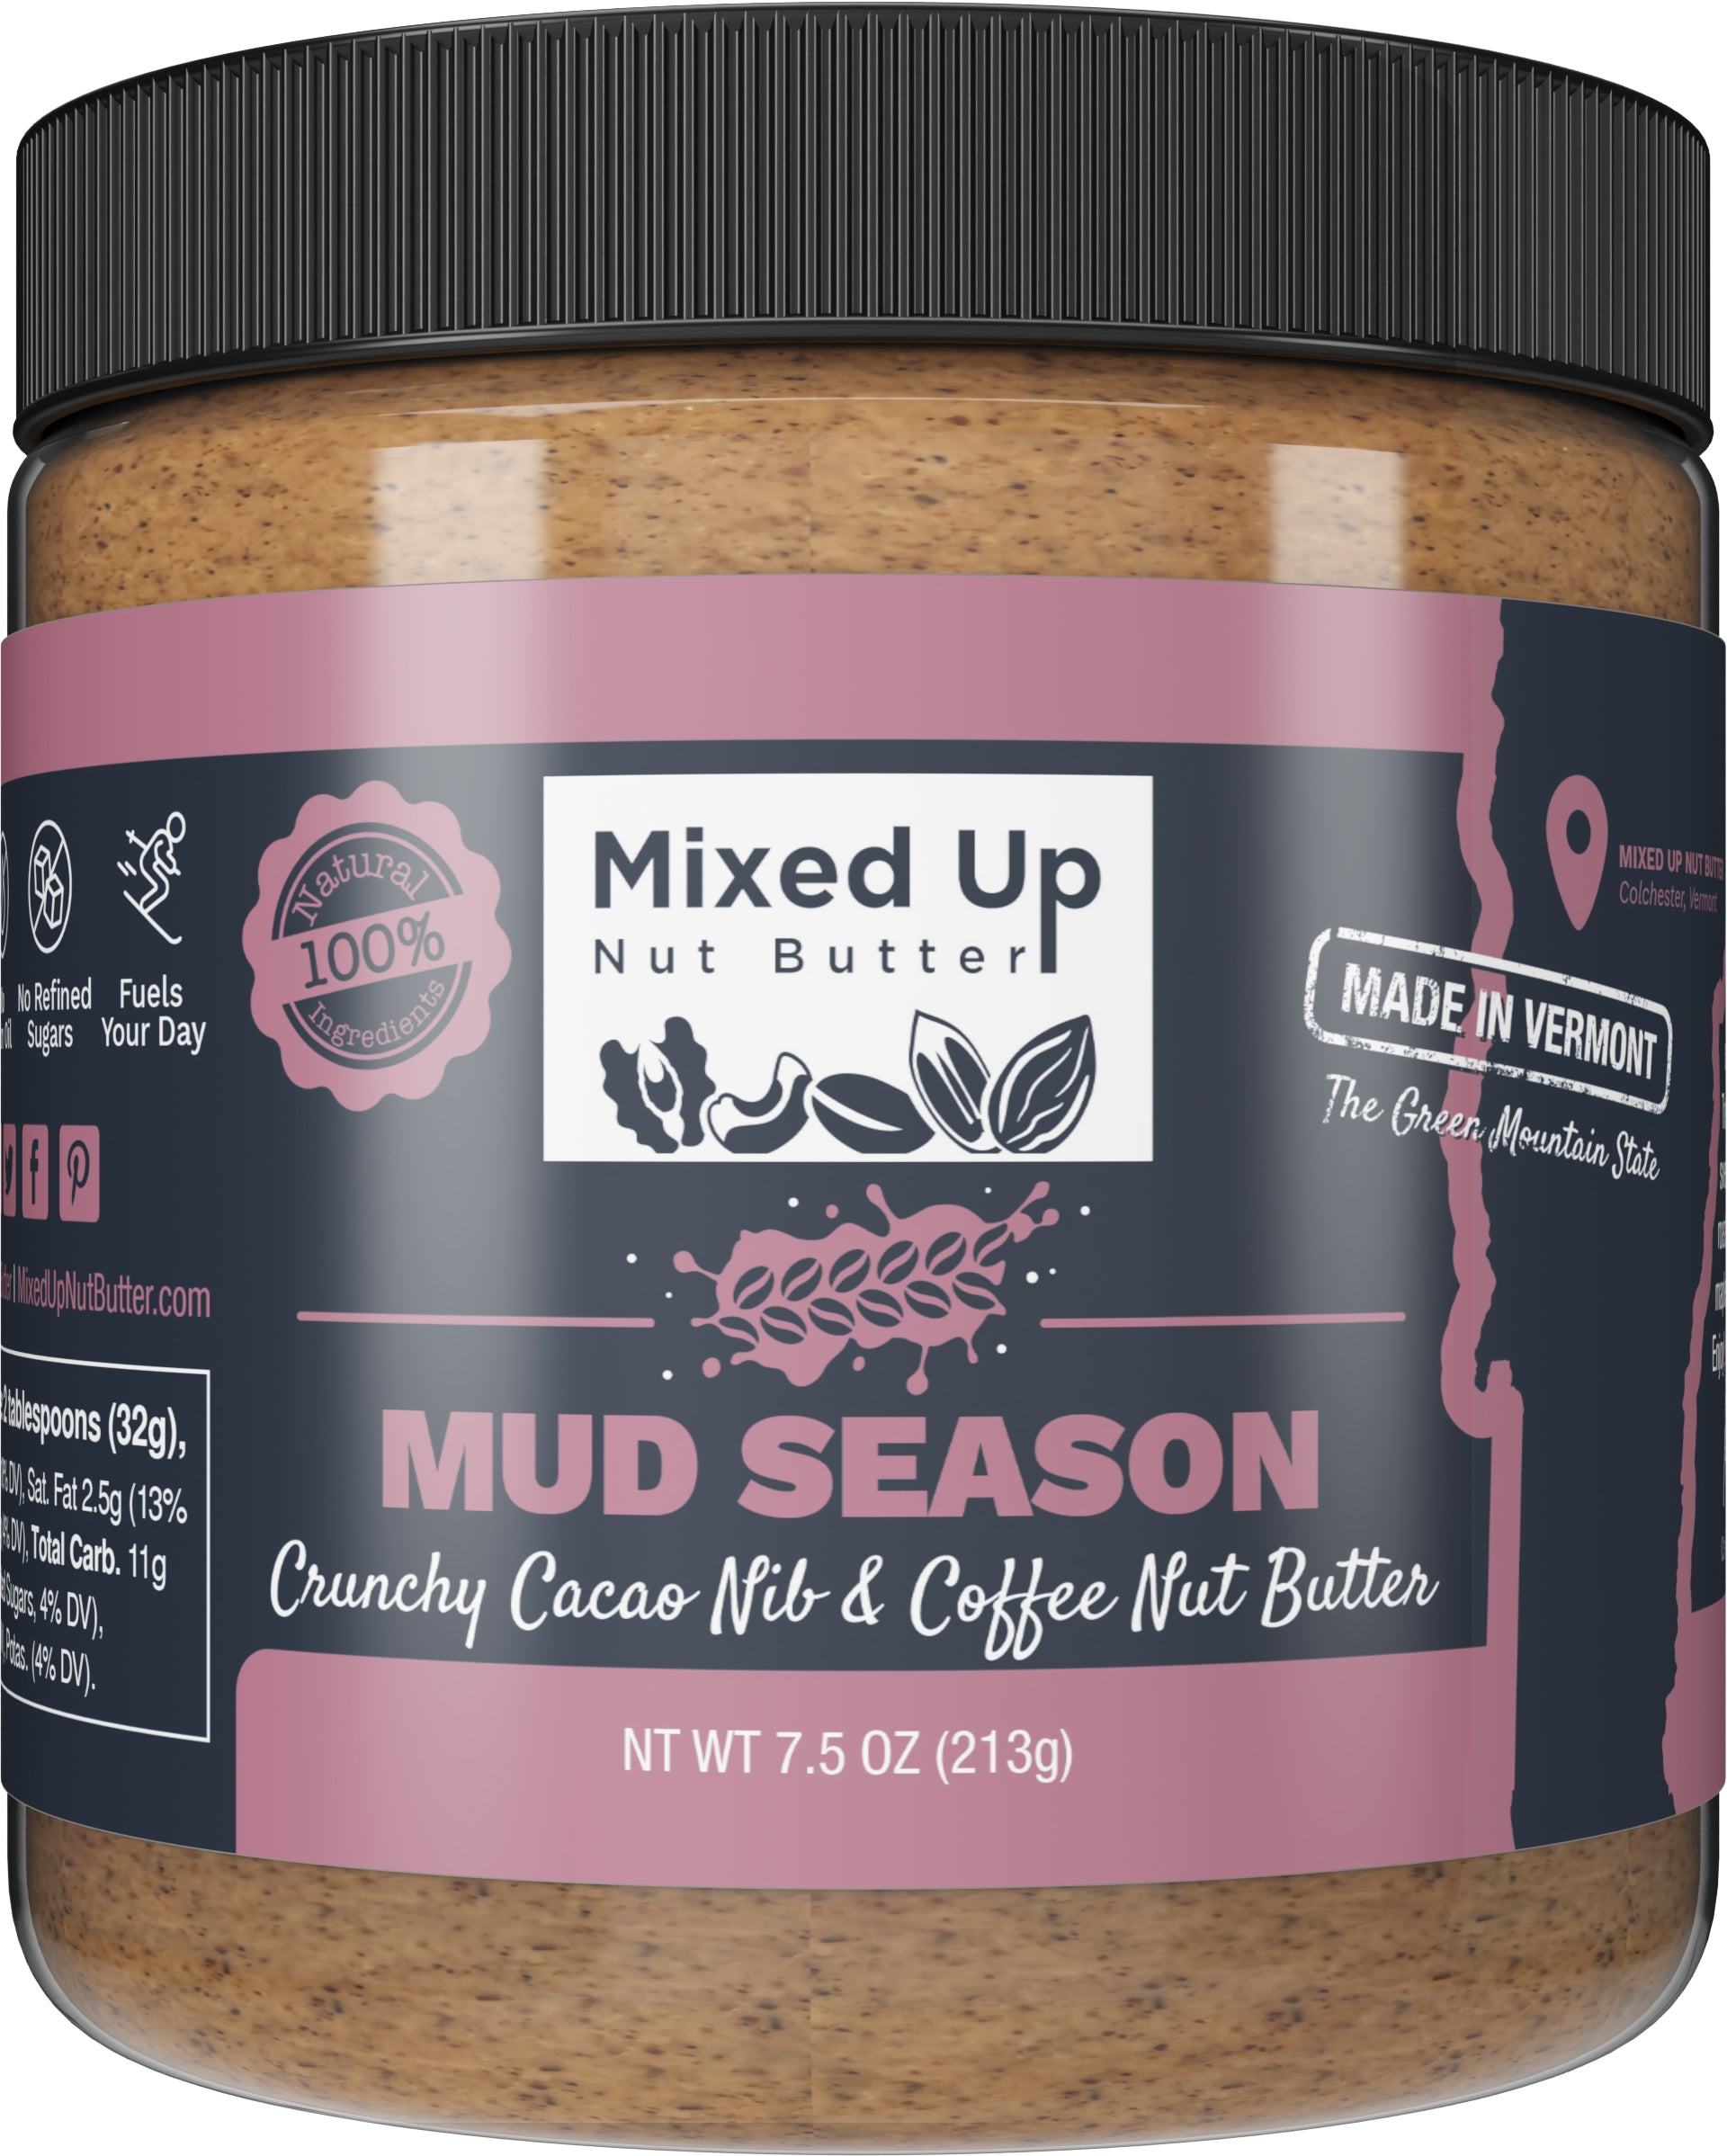 Mixed Up Nut Butter “Mud Season” Cacao Nib & Coffee Nut Butter